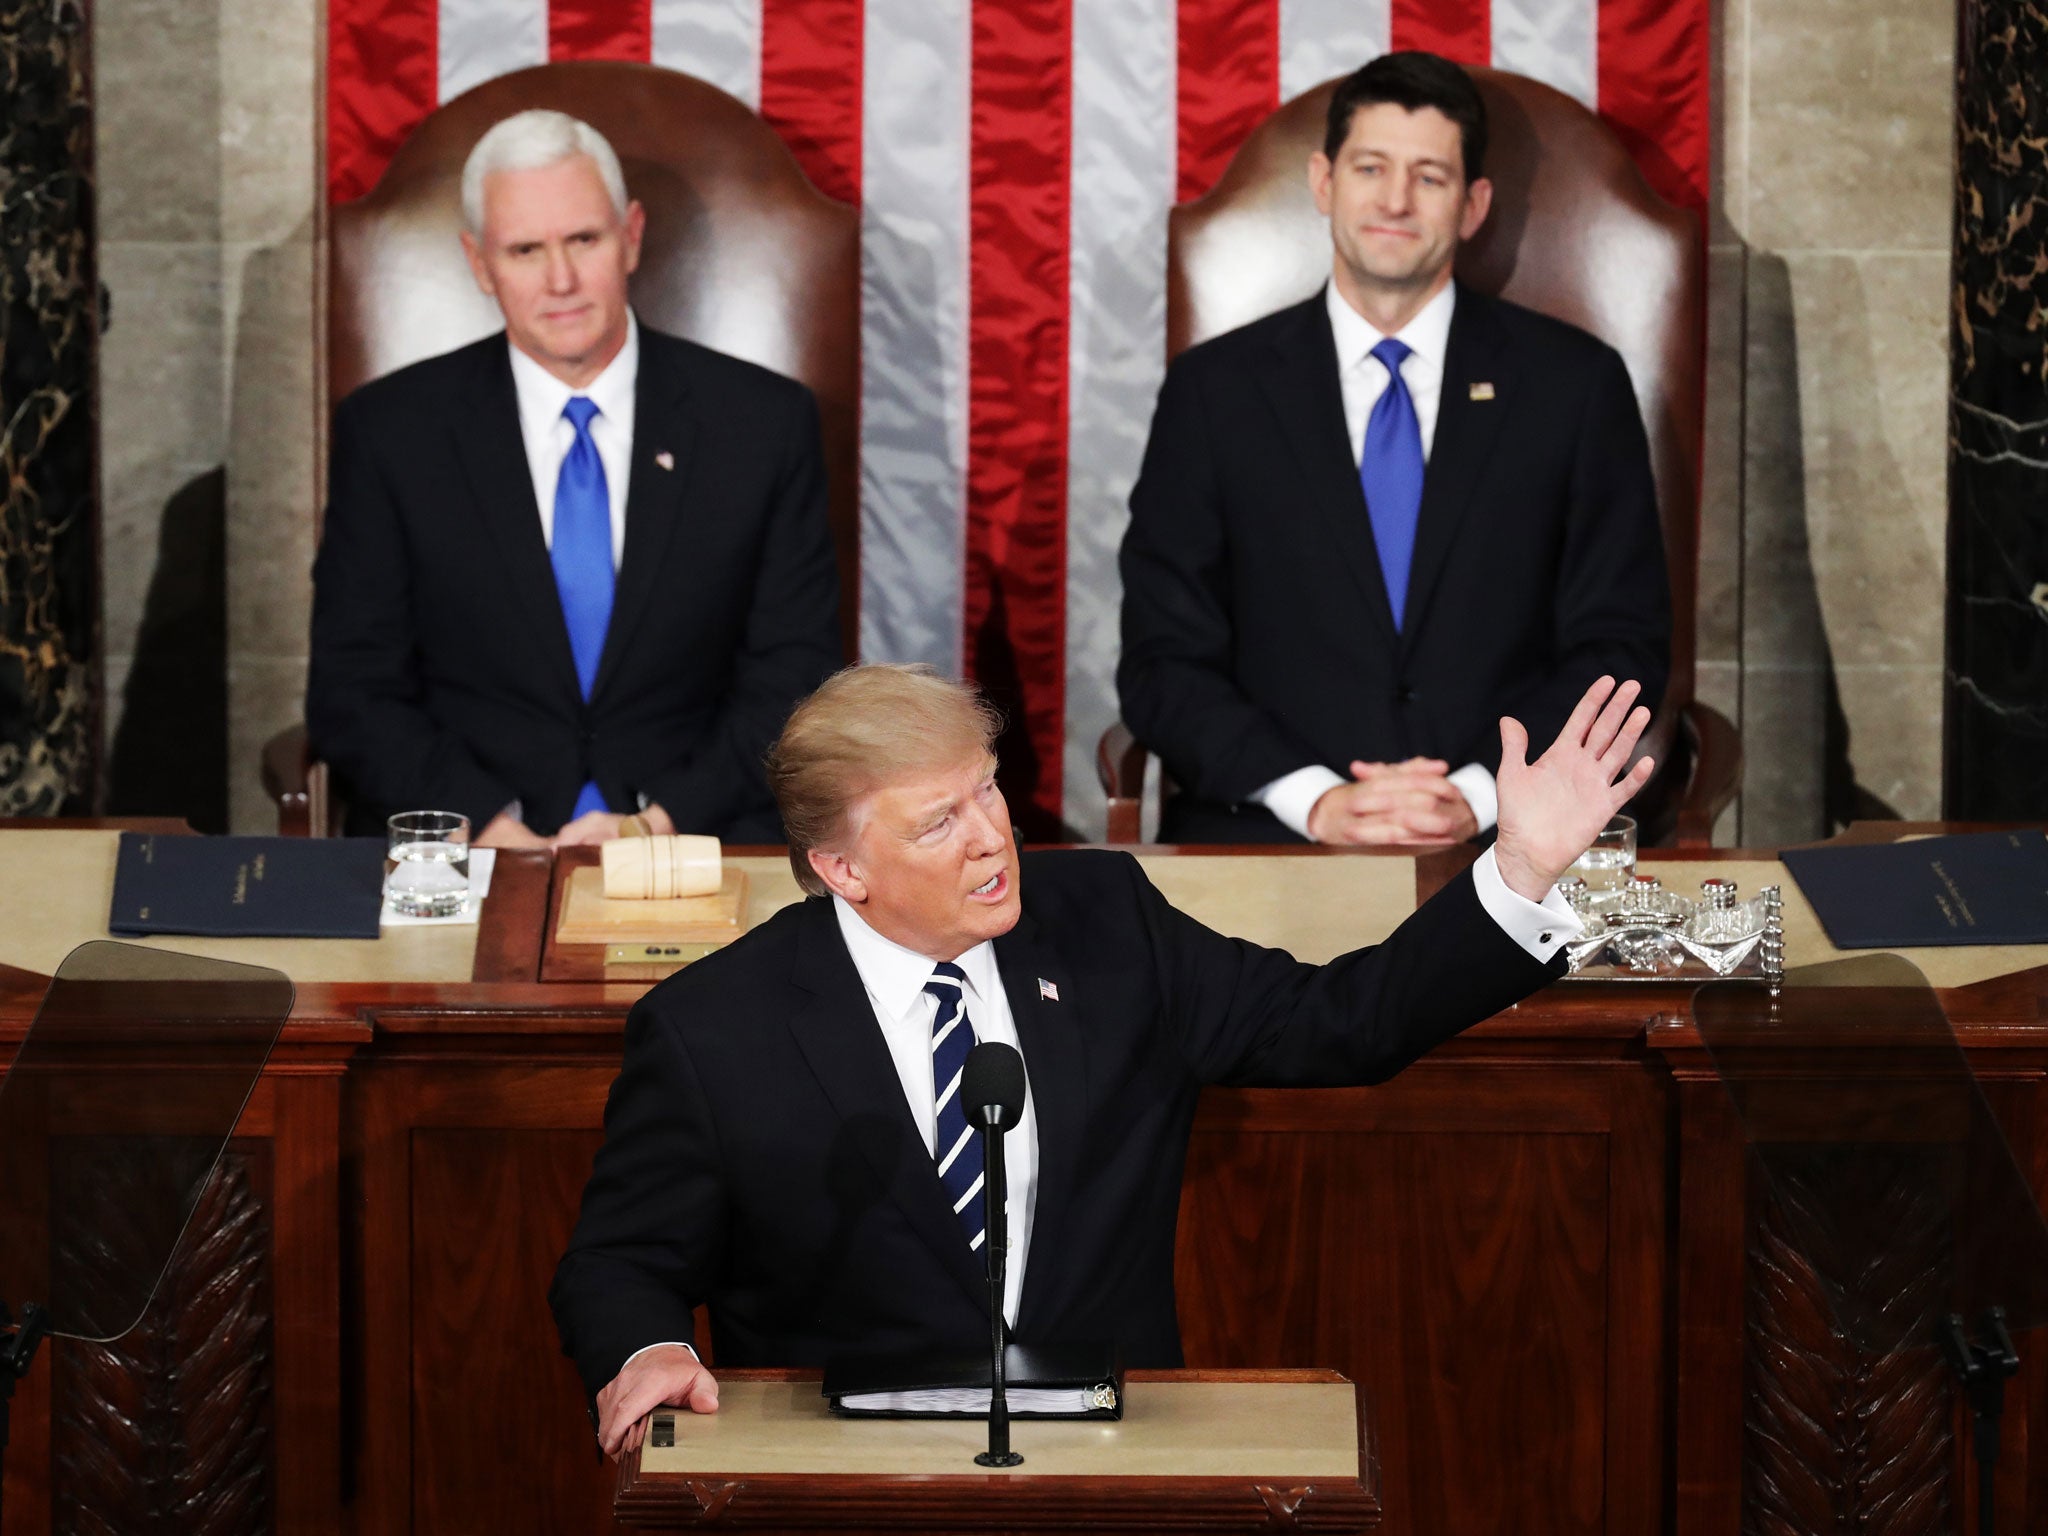 Mr Trump addresses a joint session of the US Congress as Vice President Mike Pence (left) and House Speaker Rep. Paul Ryan look on